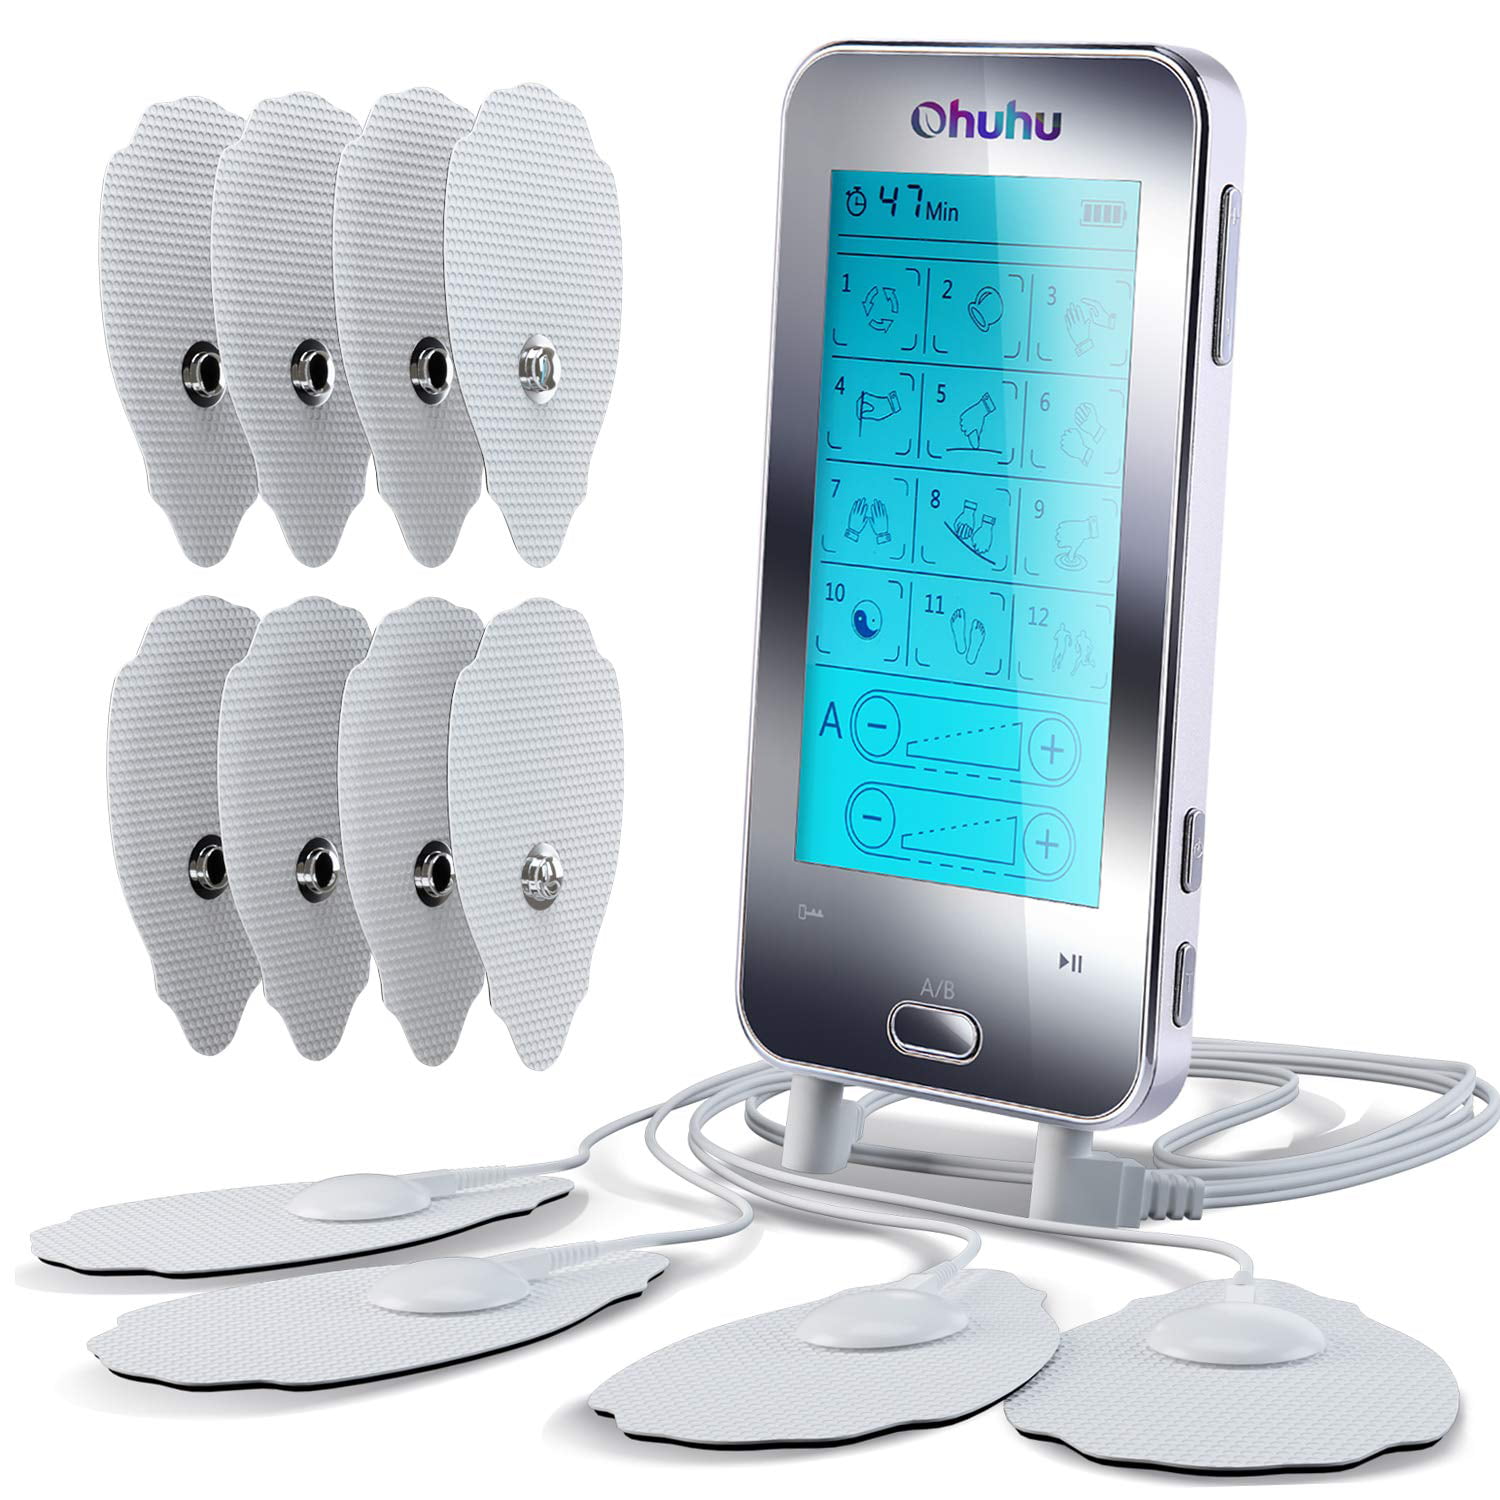 Touch Screen Tens Unit, Ohuhu FDA Cleared Muscle Stimulator with